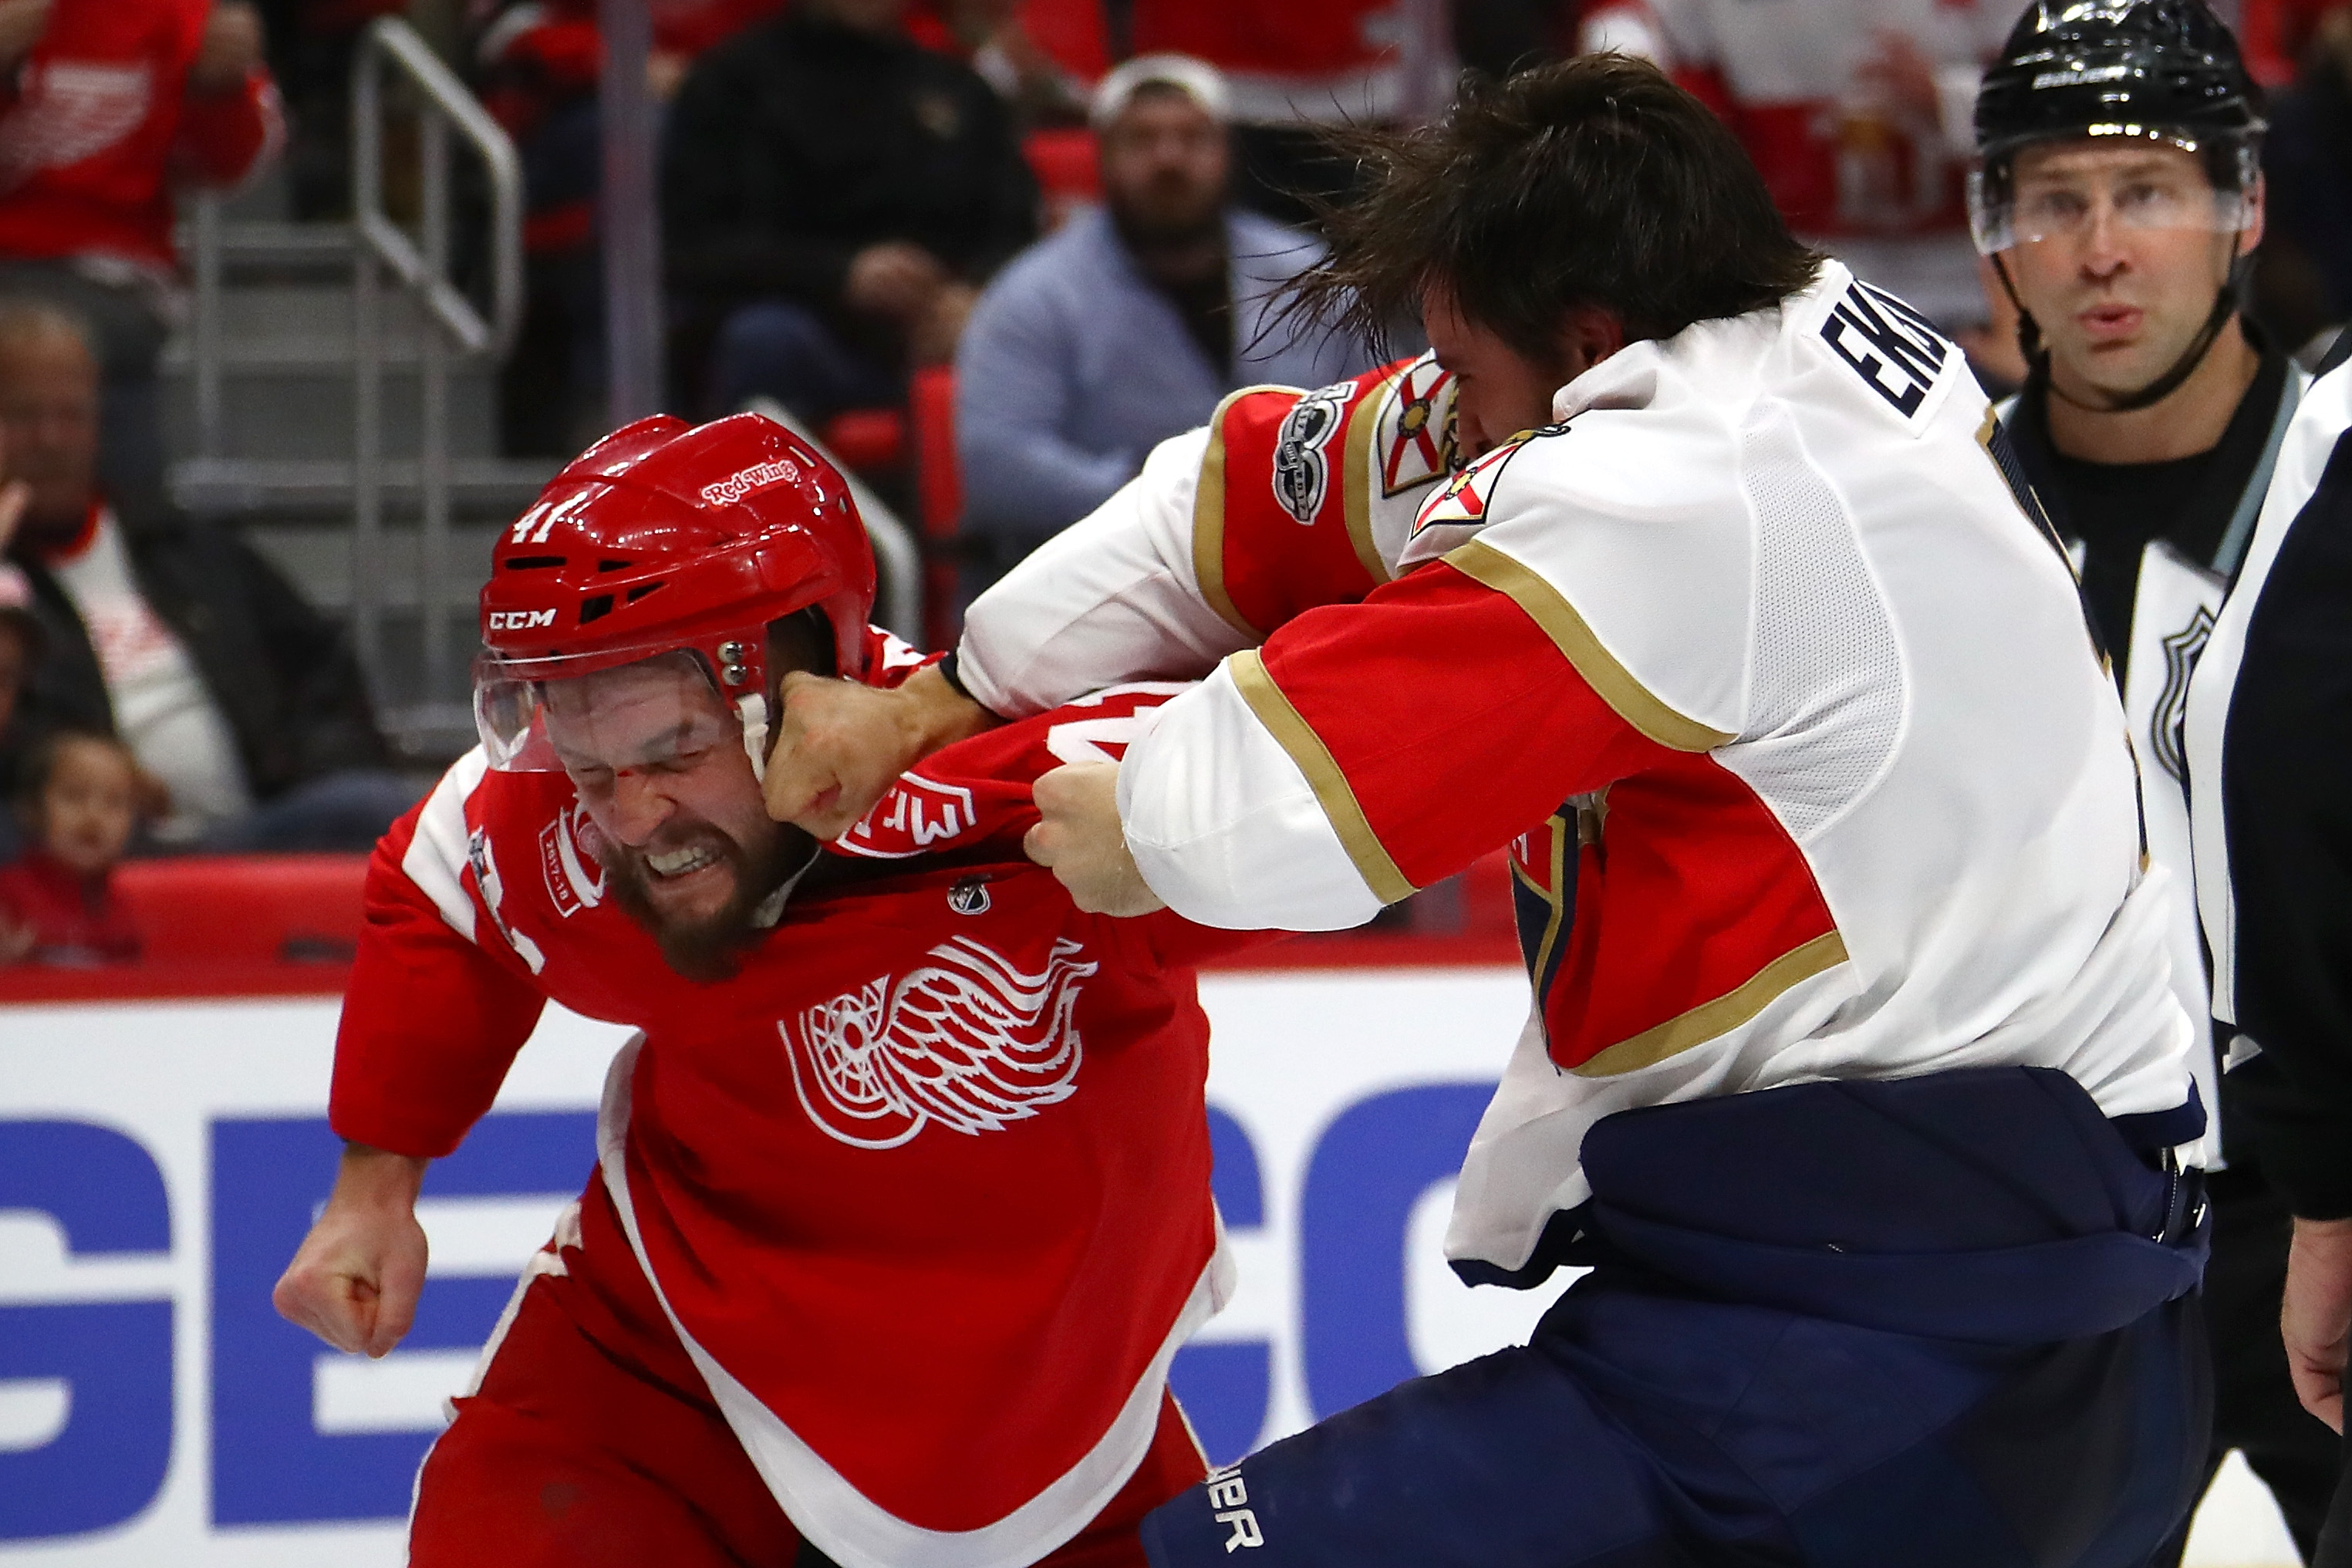 Why Doesn’t the NFL Allow Fights Like the NHL?